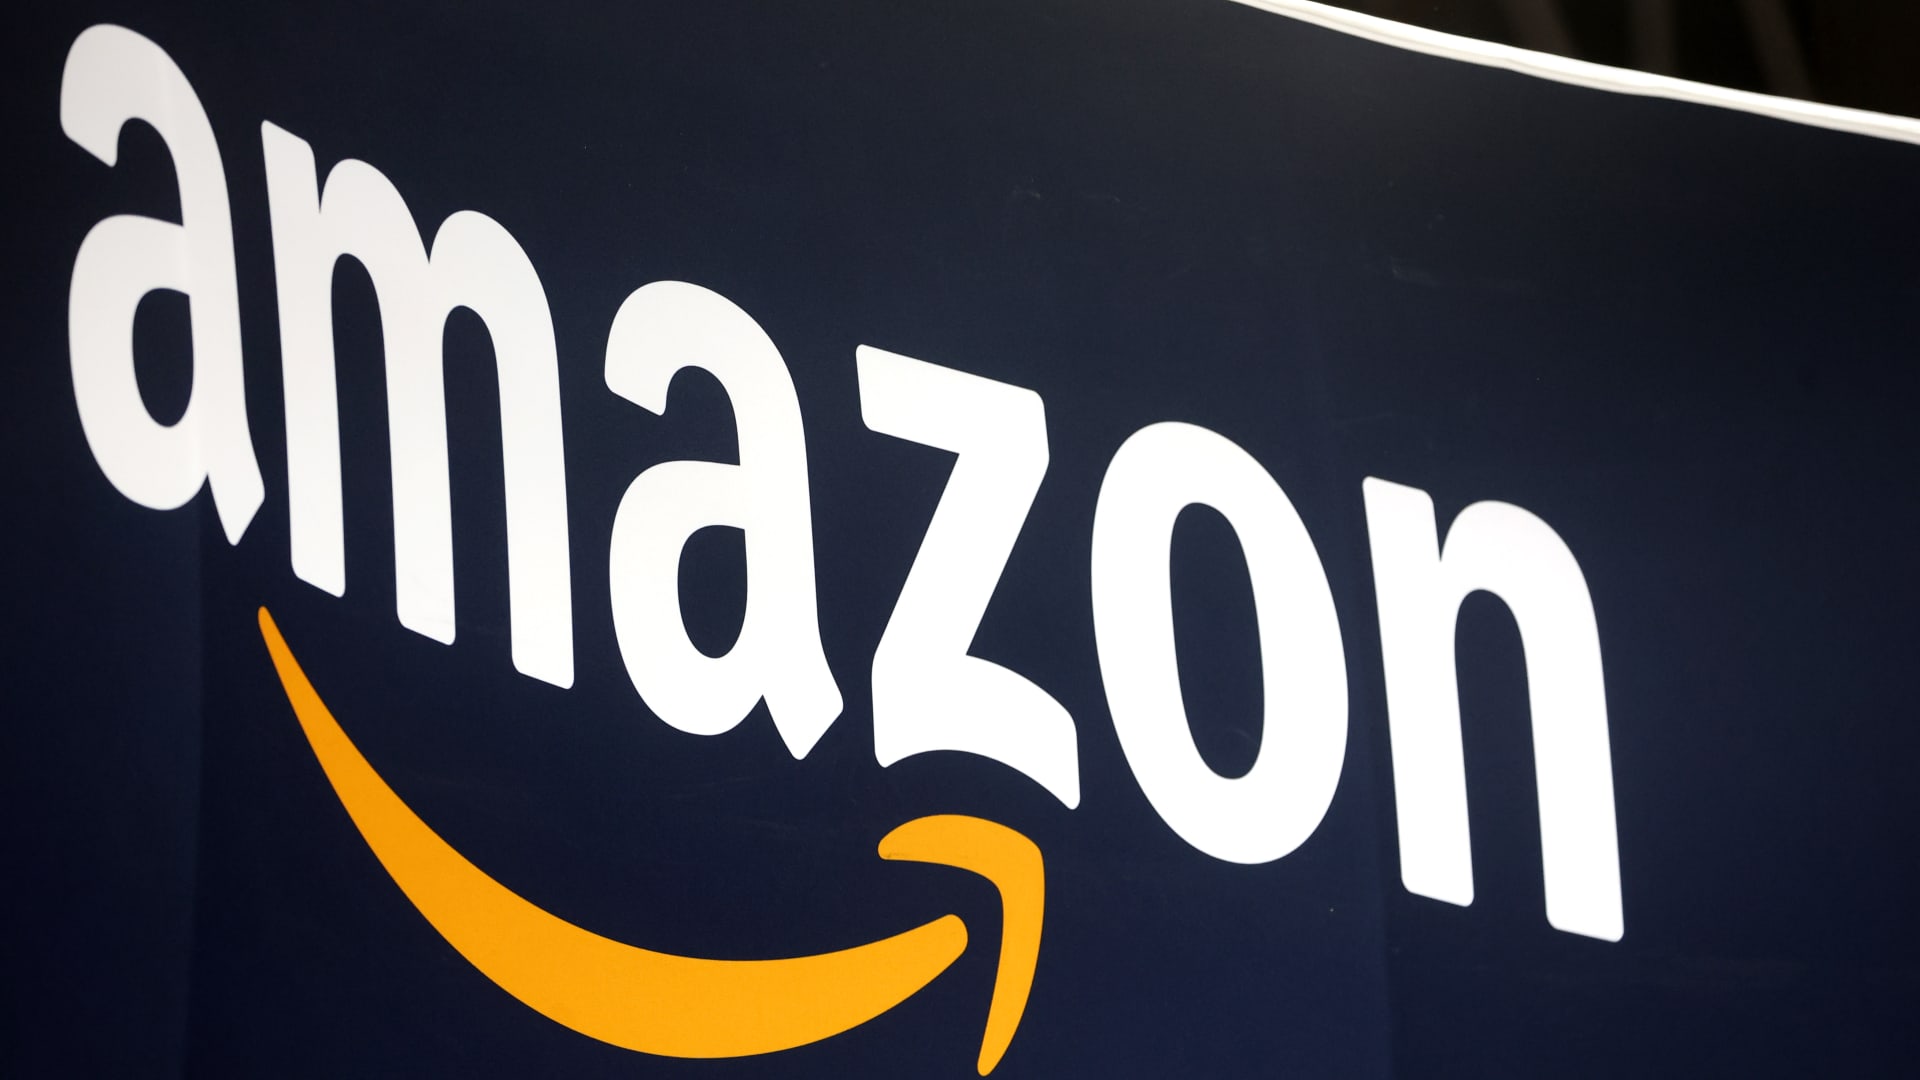 Amazon to unveil Affirm buy now, pay later for small business